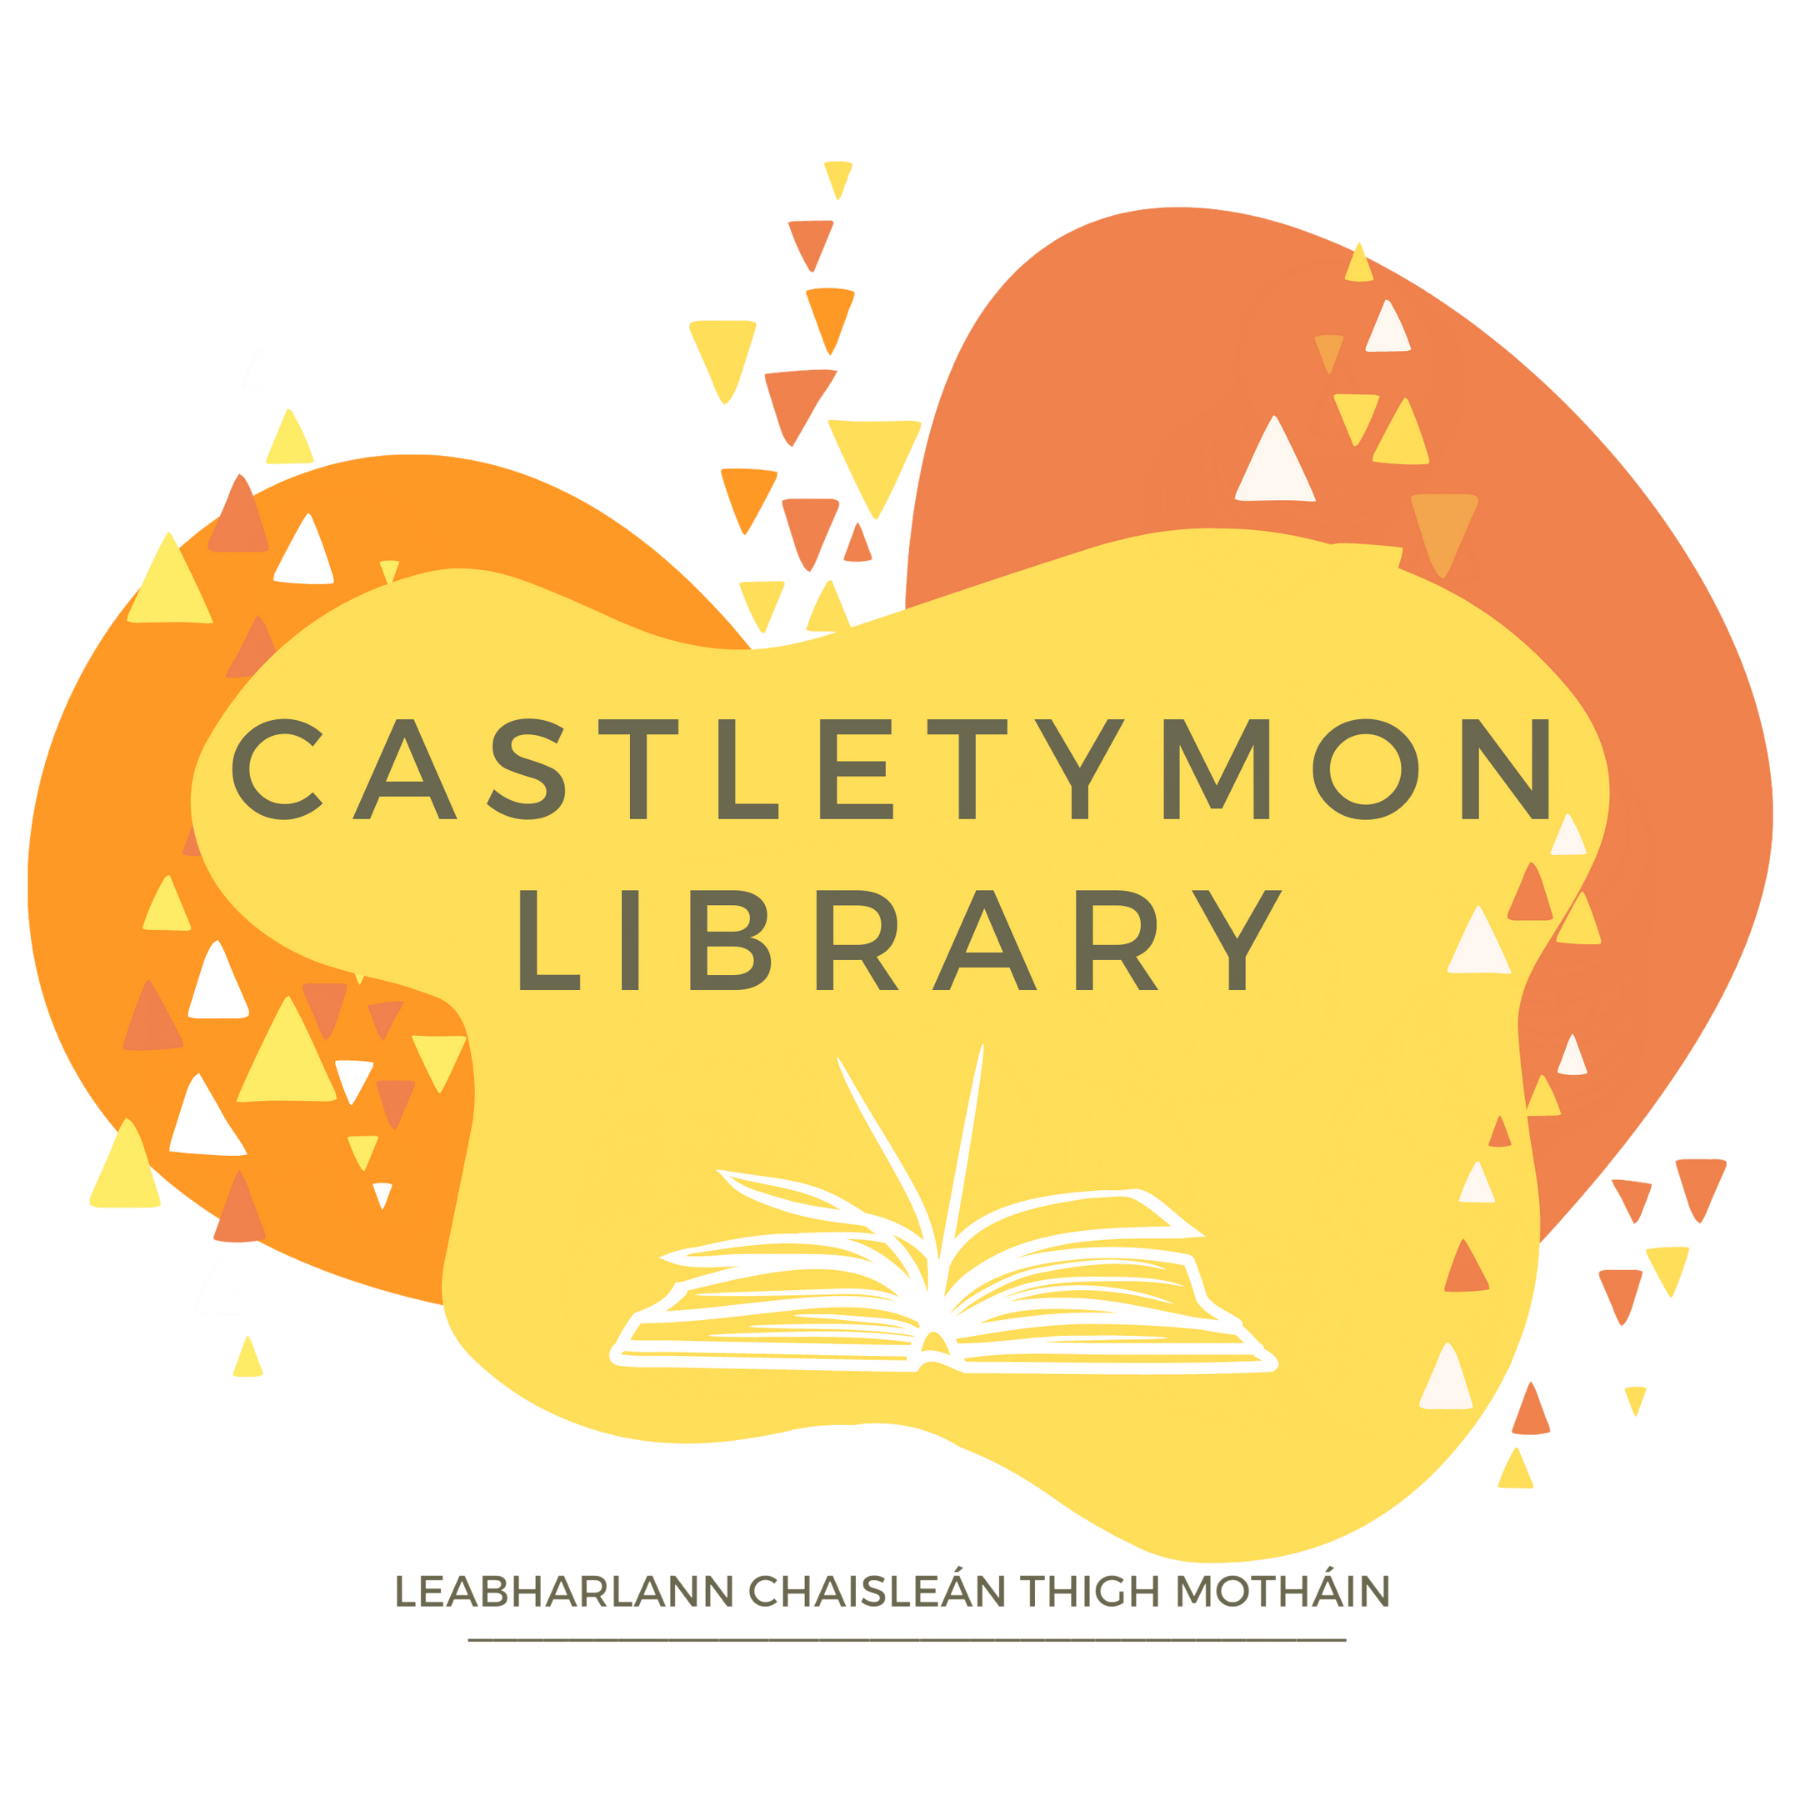 Castletymon Library Events June 2023 sumamry image